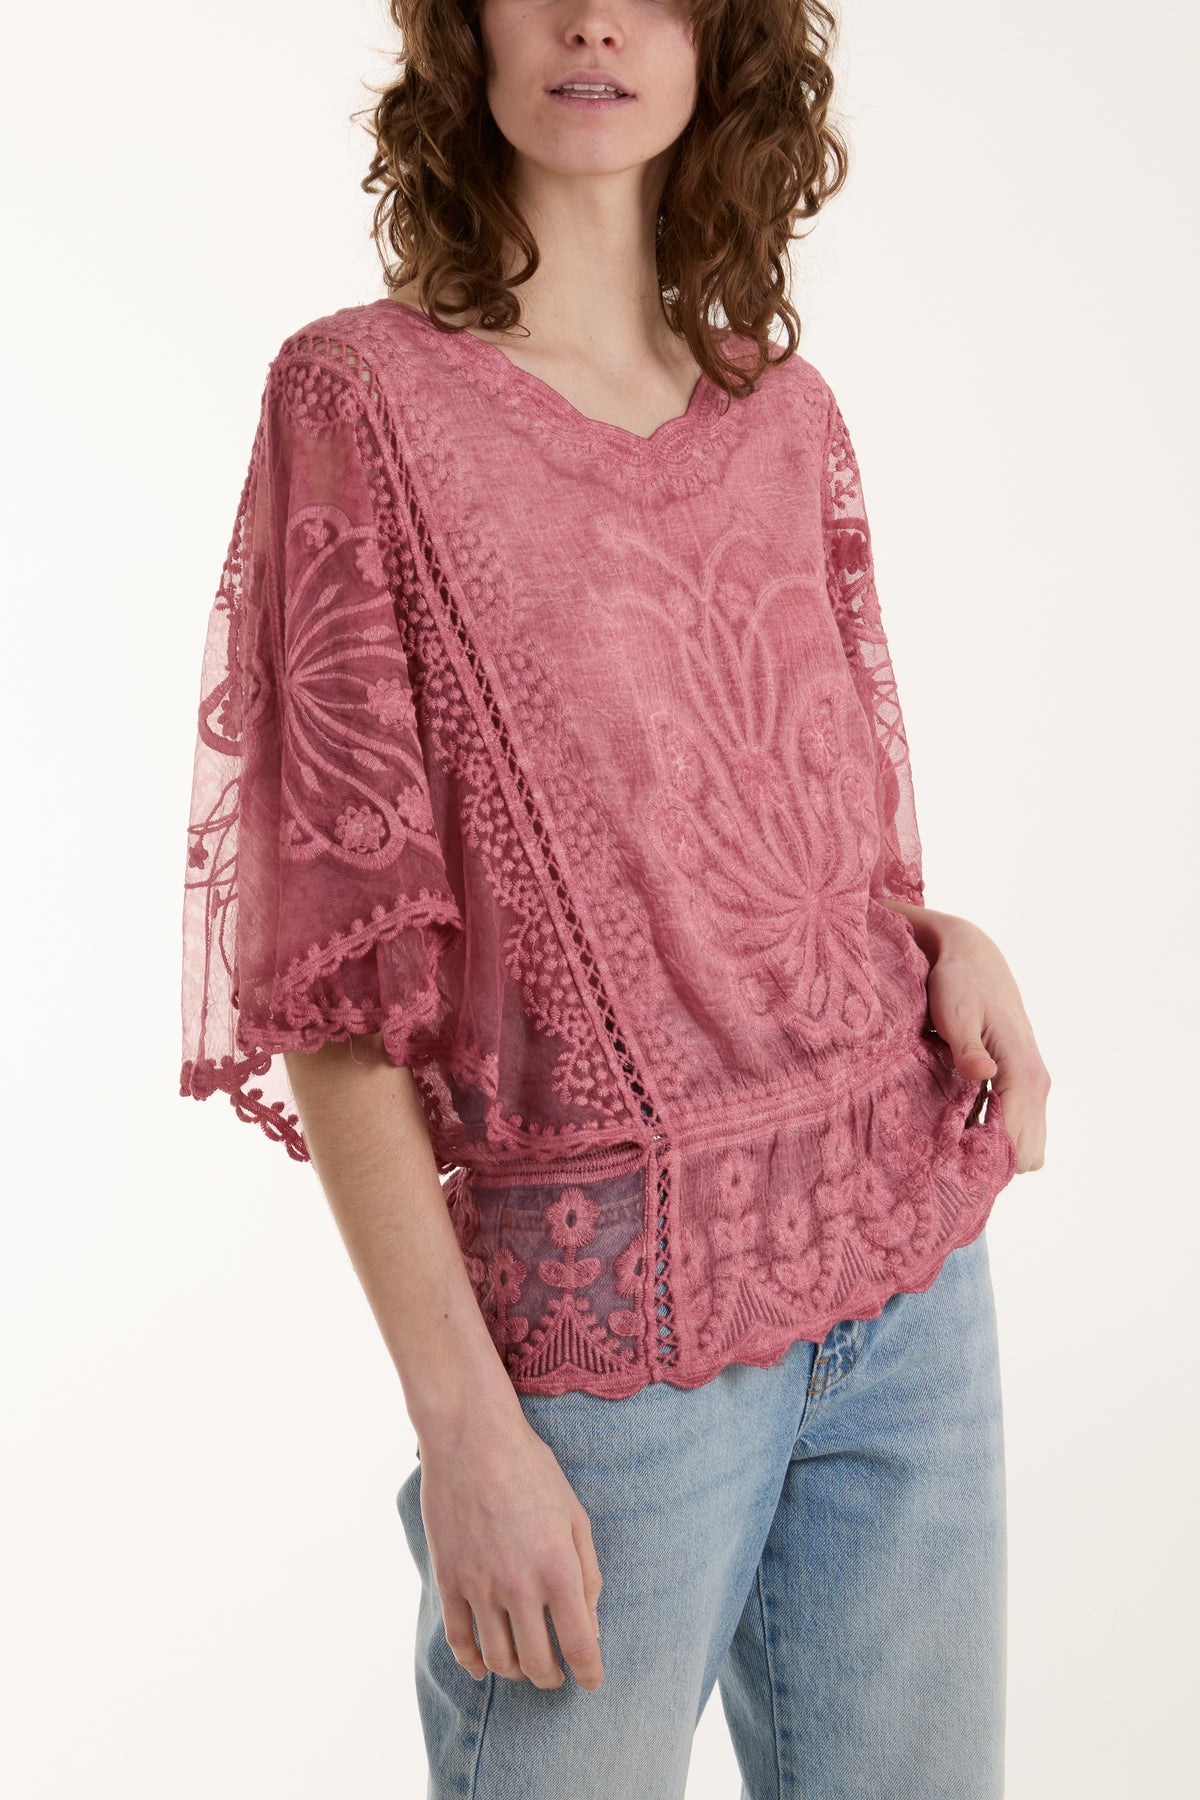 Stone Wash Lace Detail Top